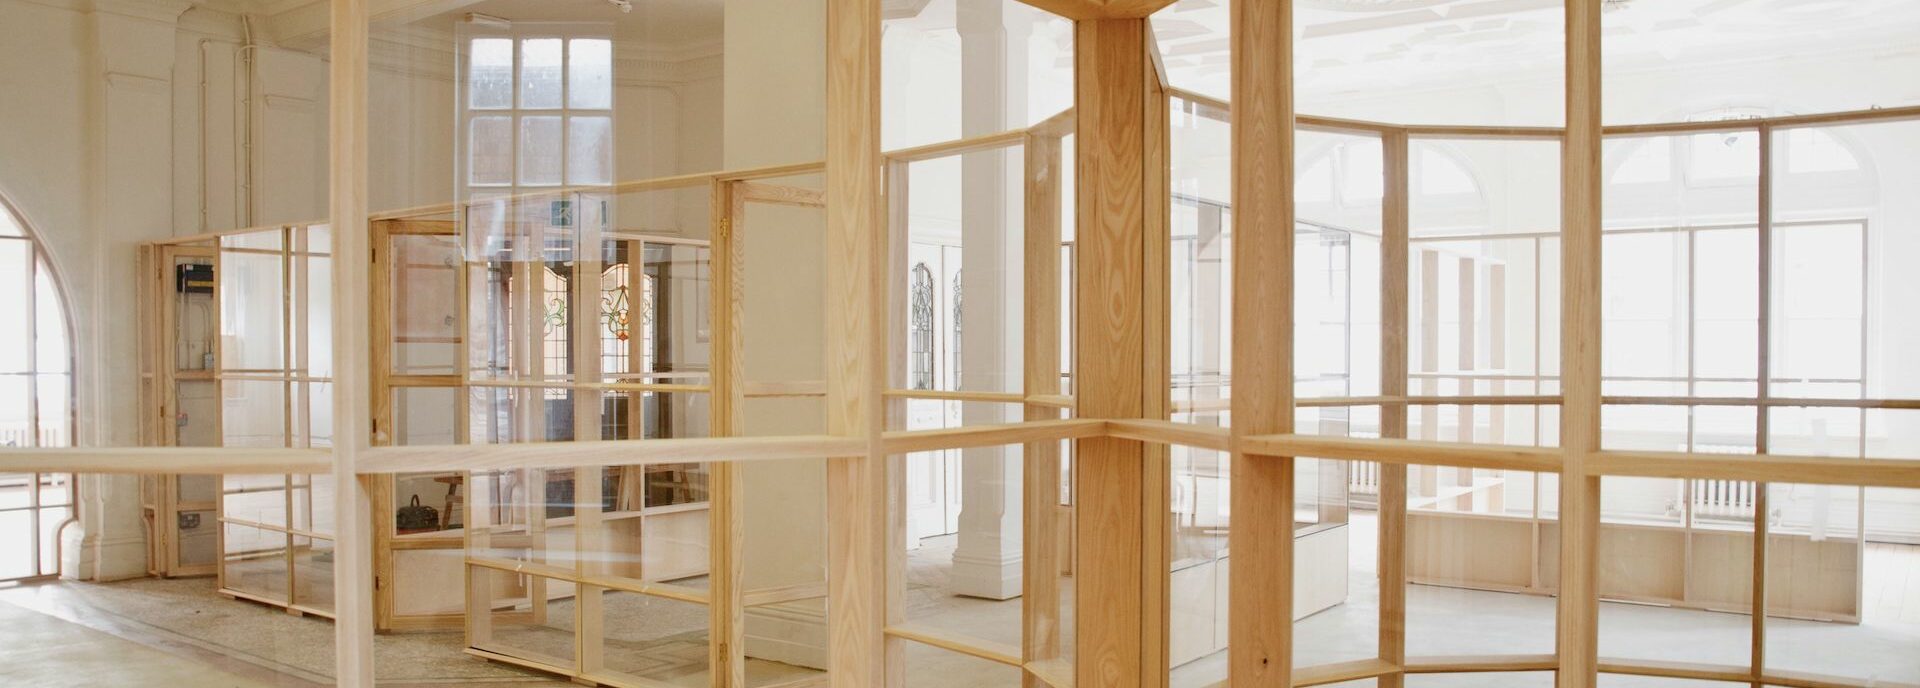 Studio spaces are divided by glass partitions